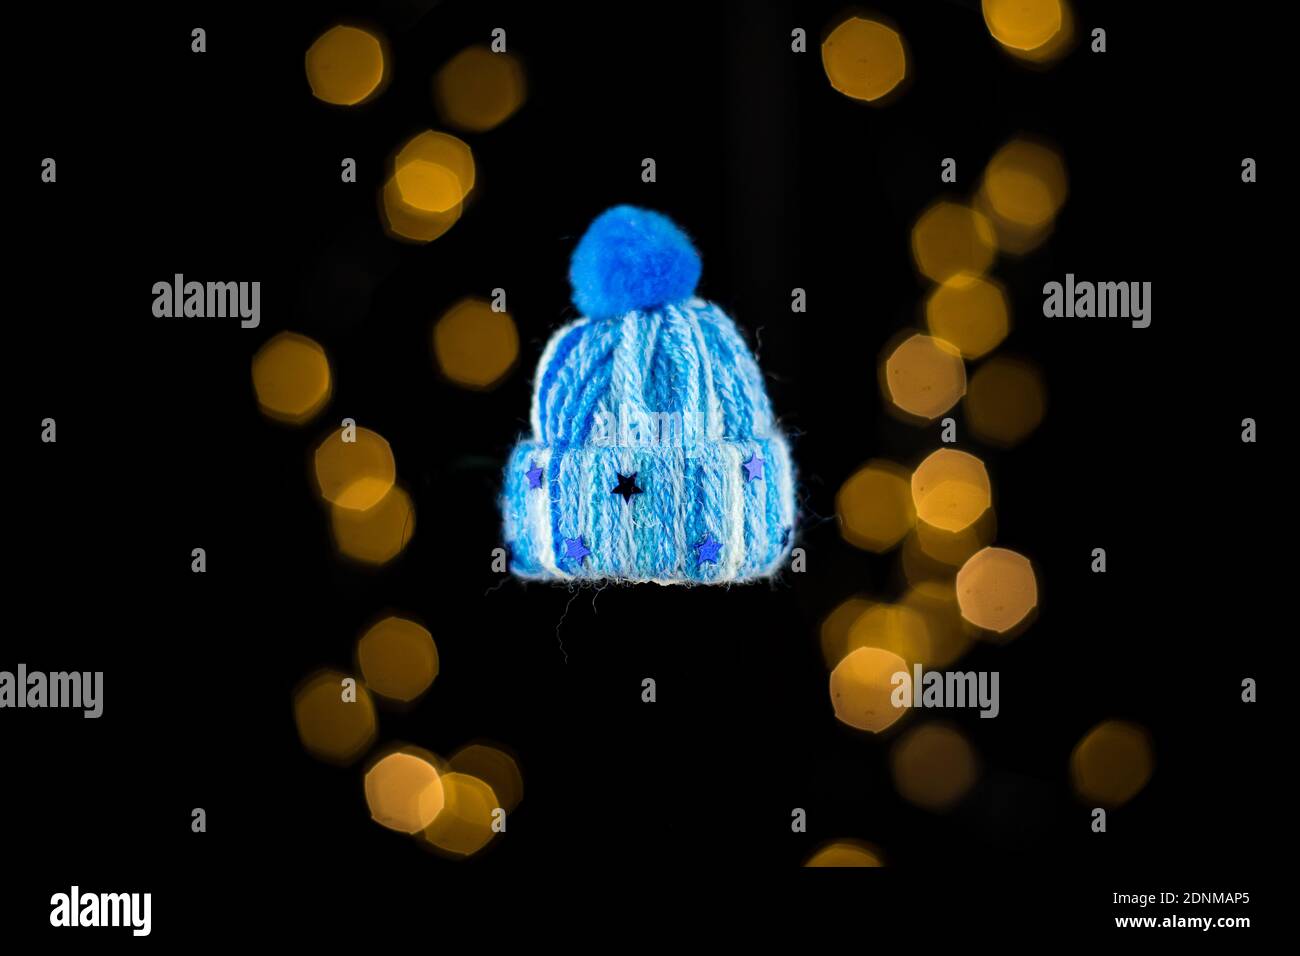 KATOWICE, POLAND - Dec 11, 2020: Decoration for the Christmas tree (cap) on the background of lights. Stock Photo